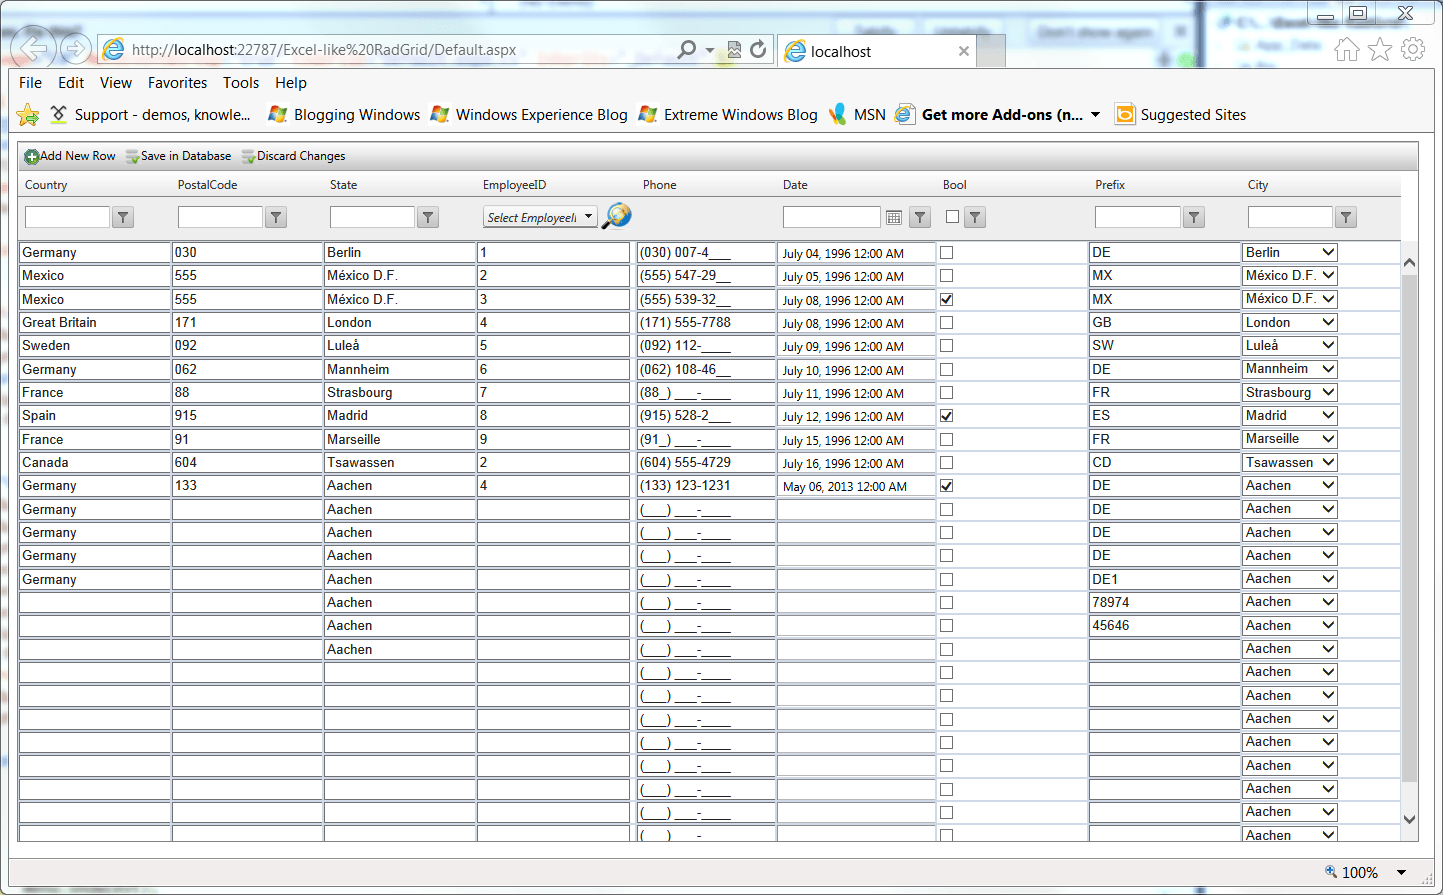 Excel look and feel for RadGrid